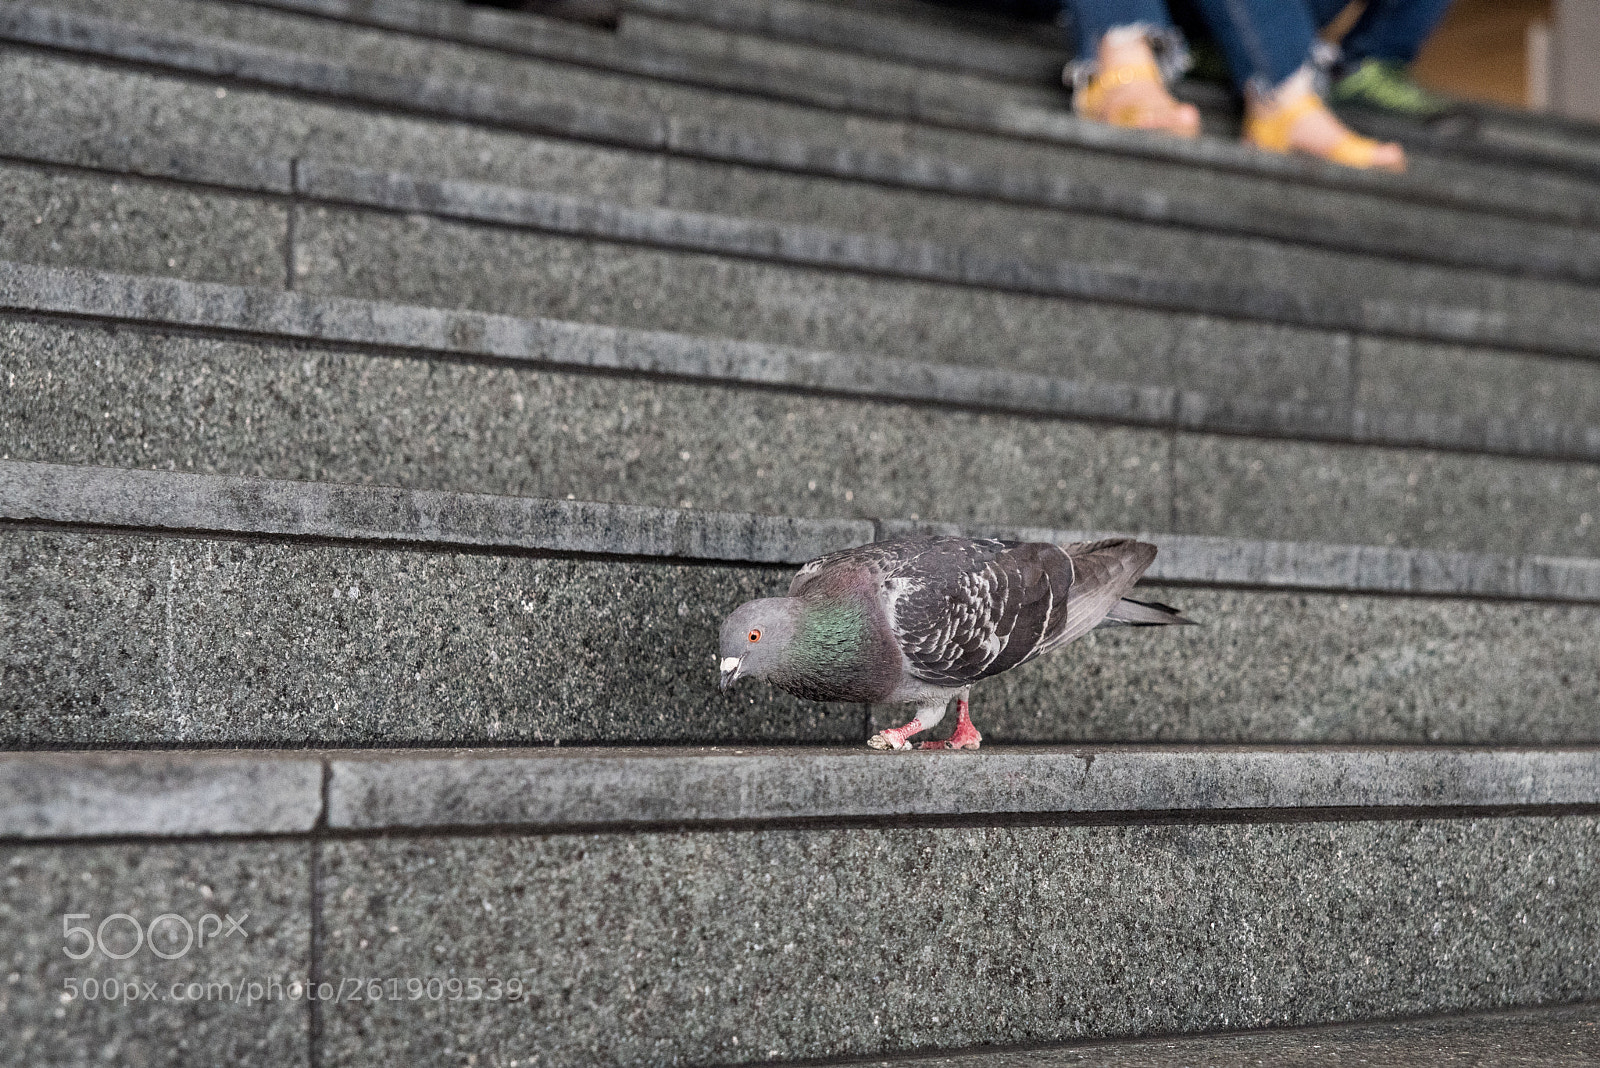 Pentax K-1 sample photo. A pigeon in the photography